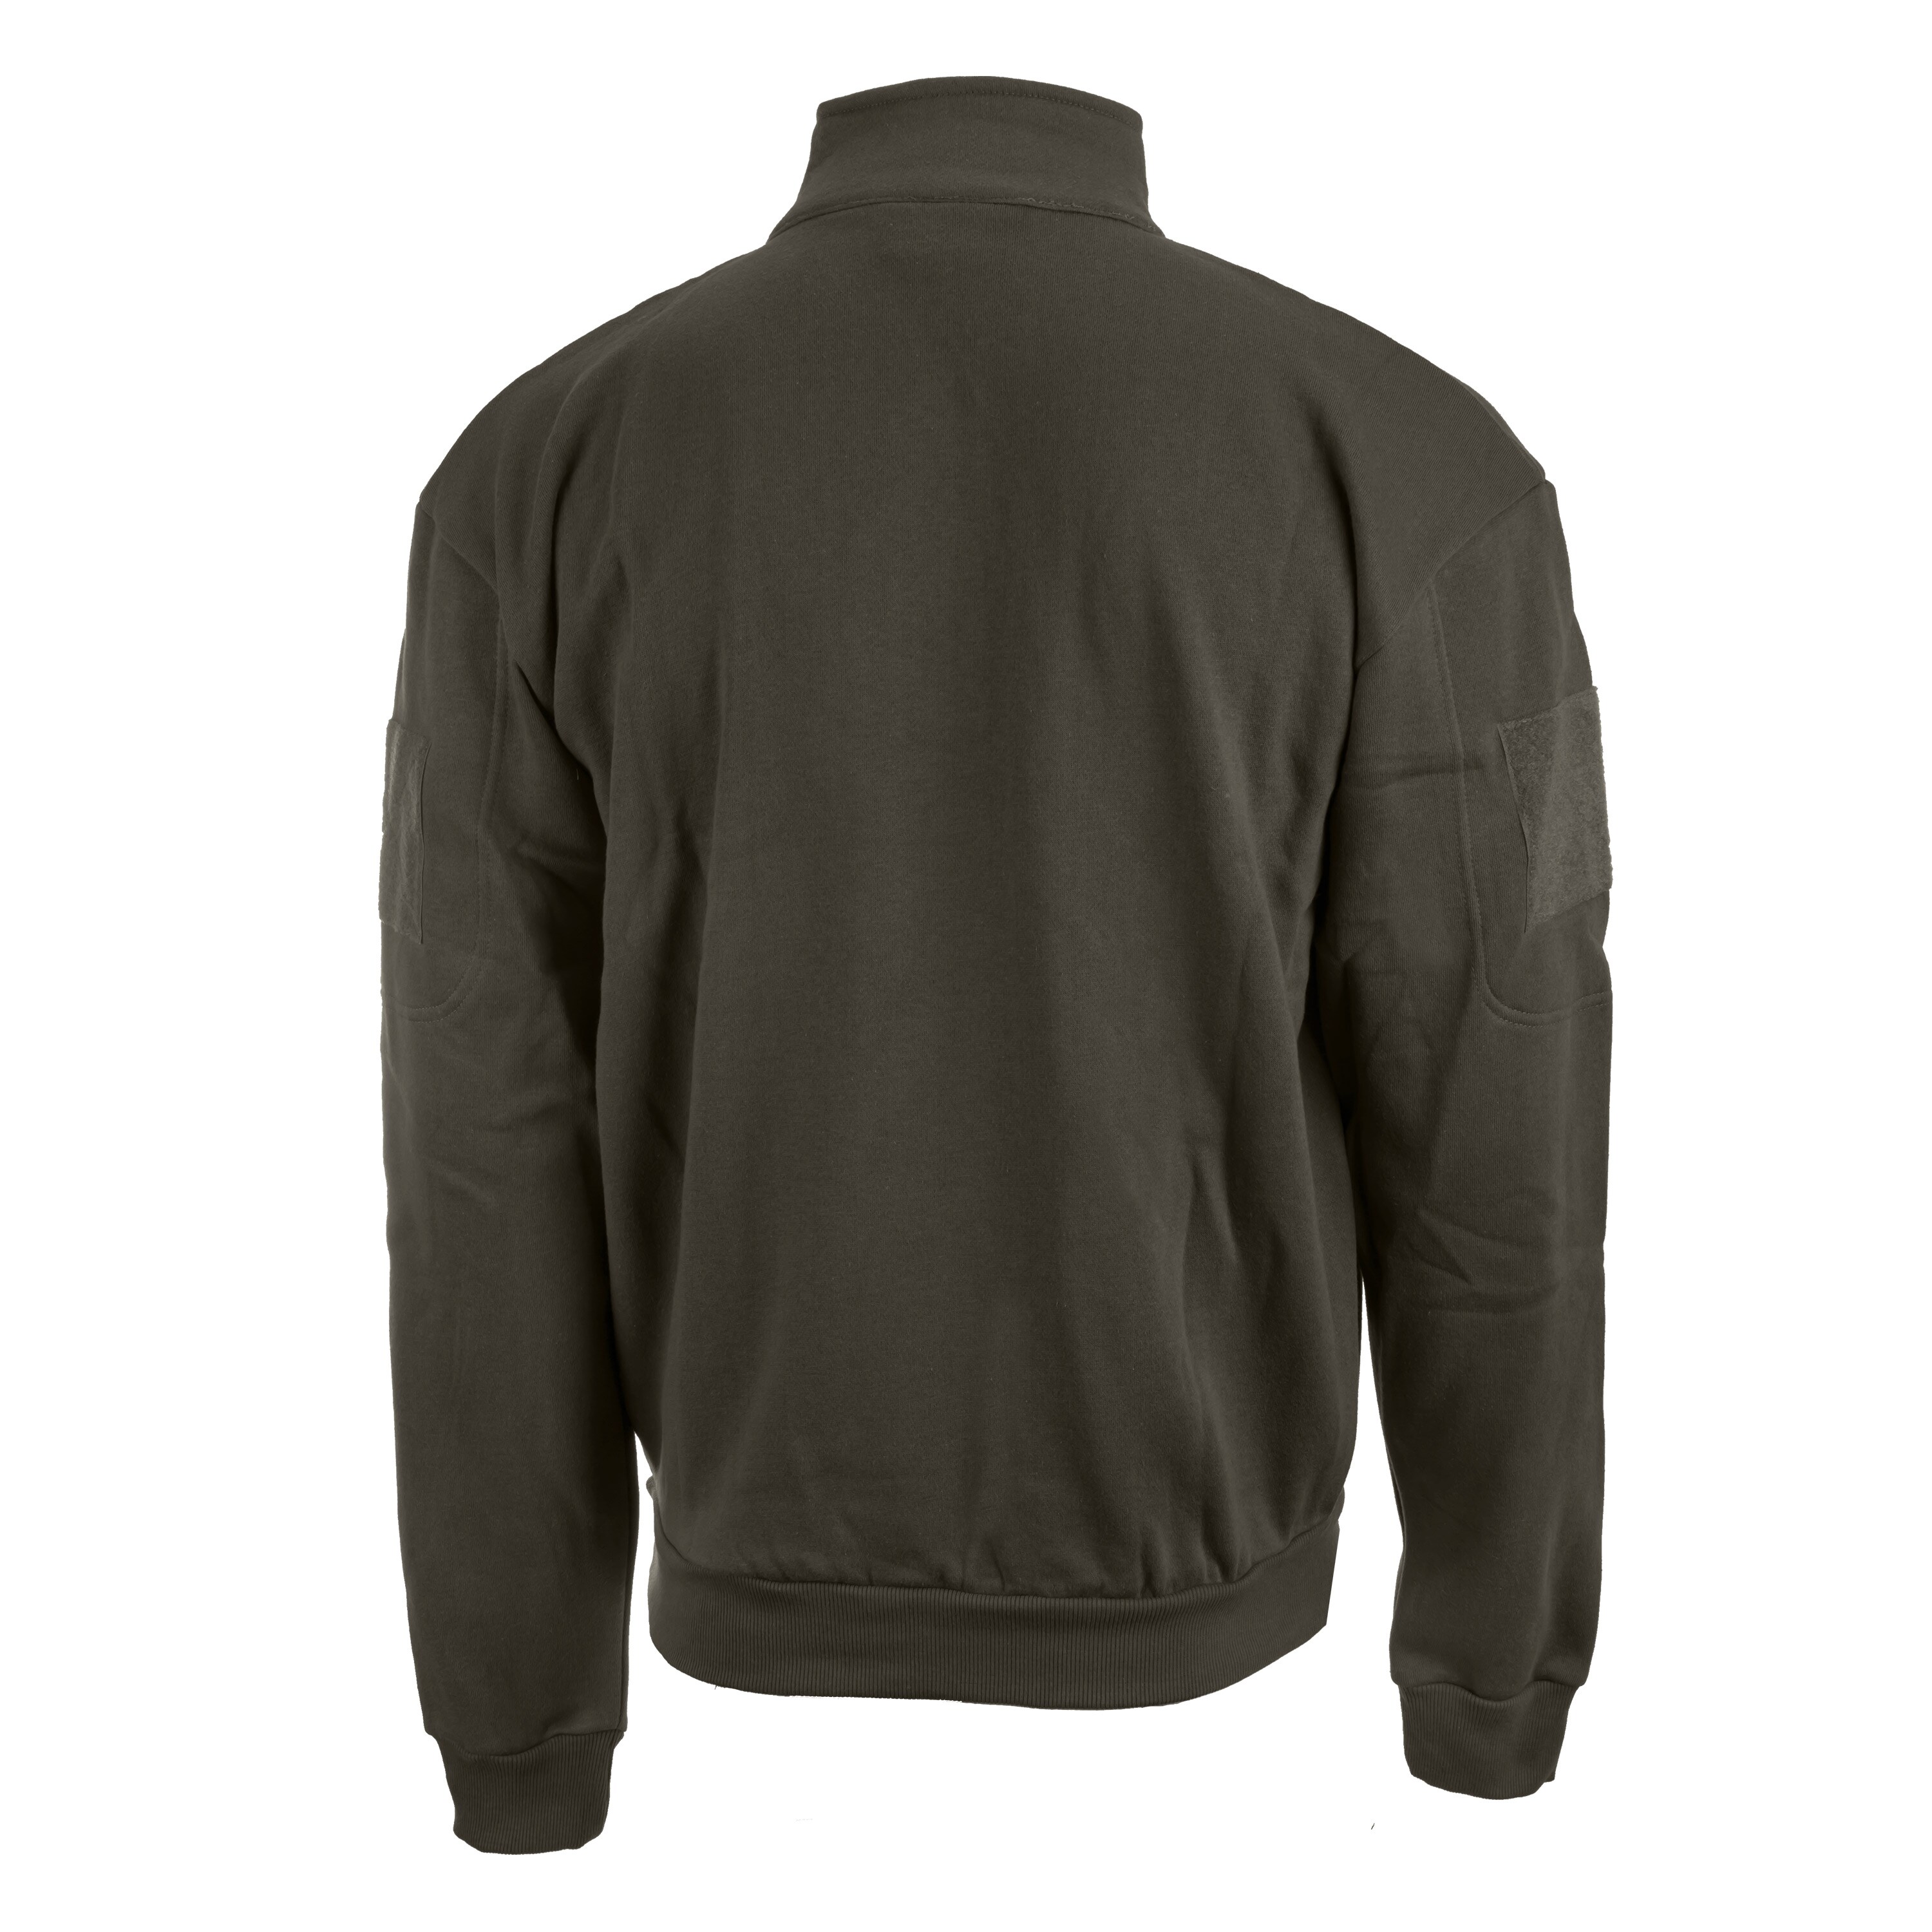 Purchase the Mil-Tec Tactical Sweatshirt with Zipper ranger gree